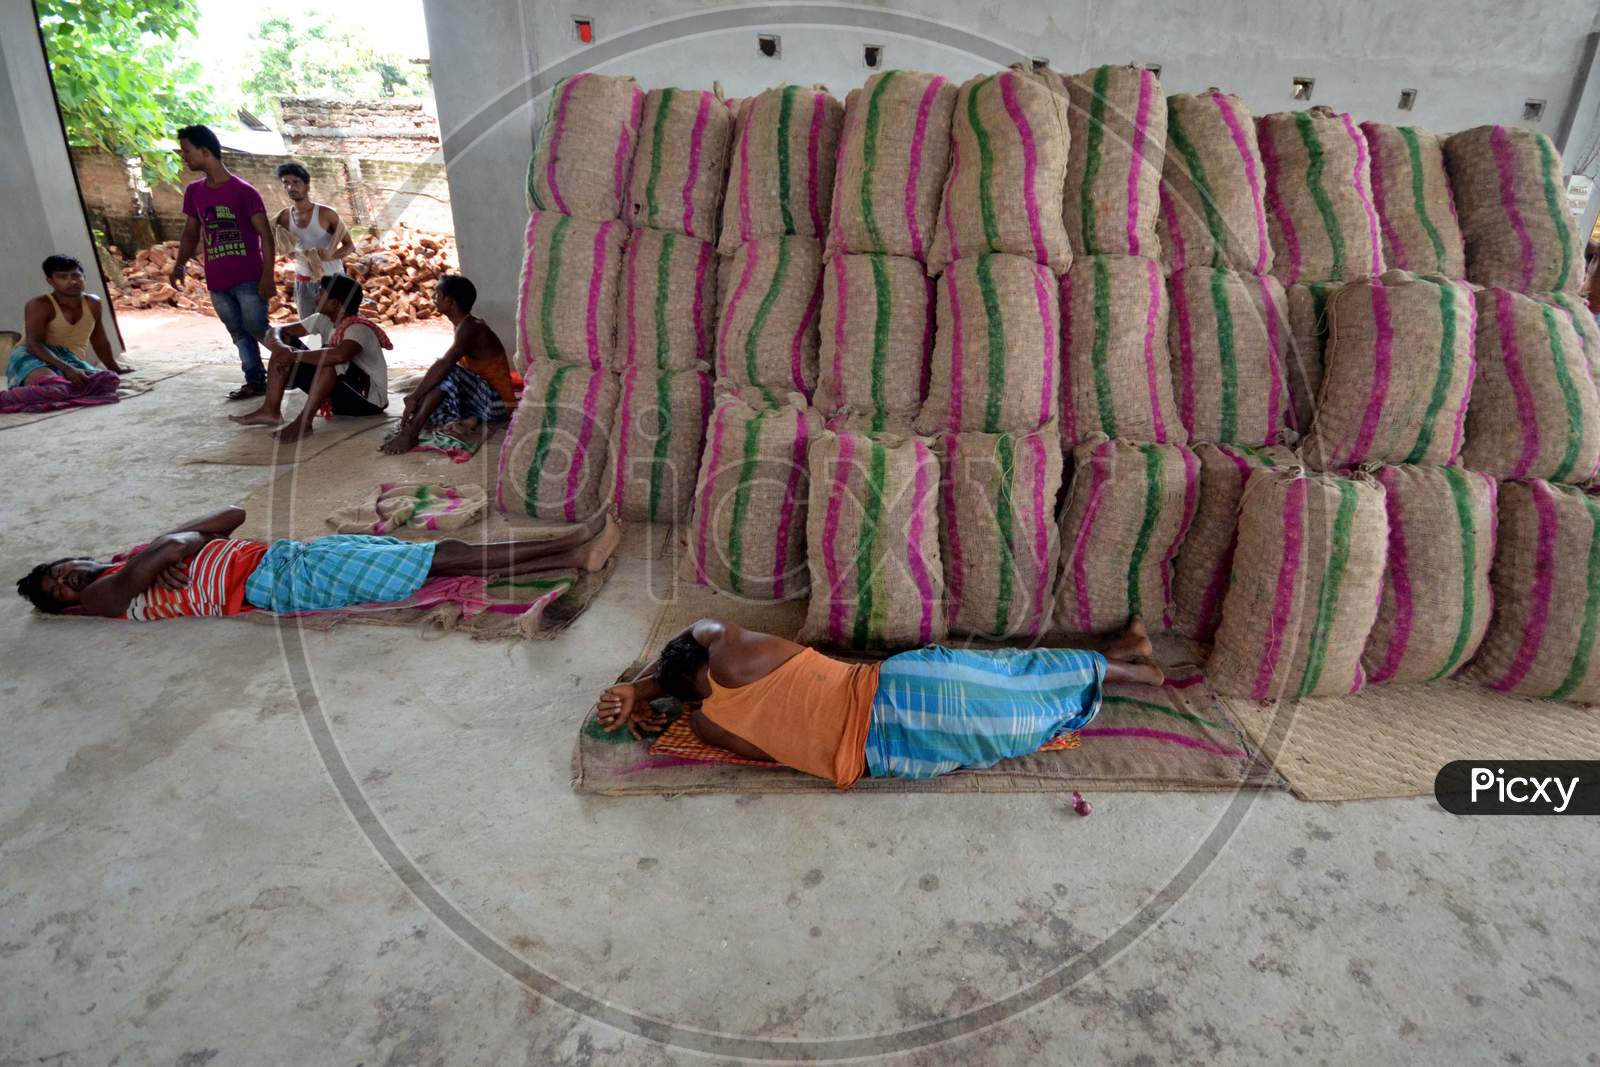 Daily Labor Workers in an Onion Storage House With Onion Bags in Nagaon, Assam